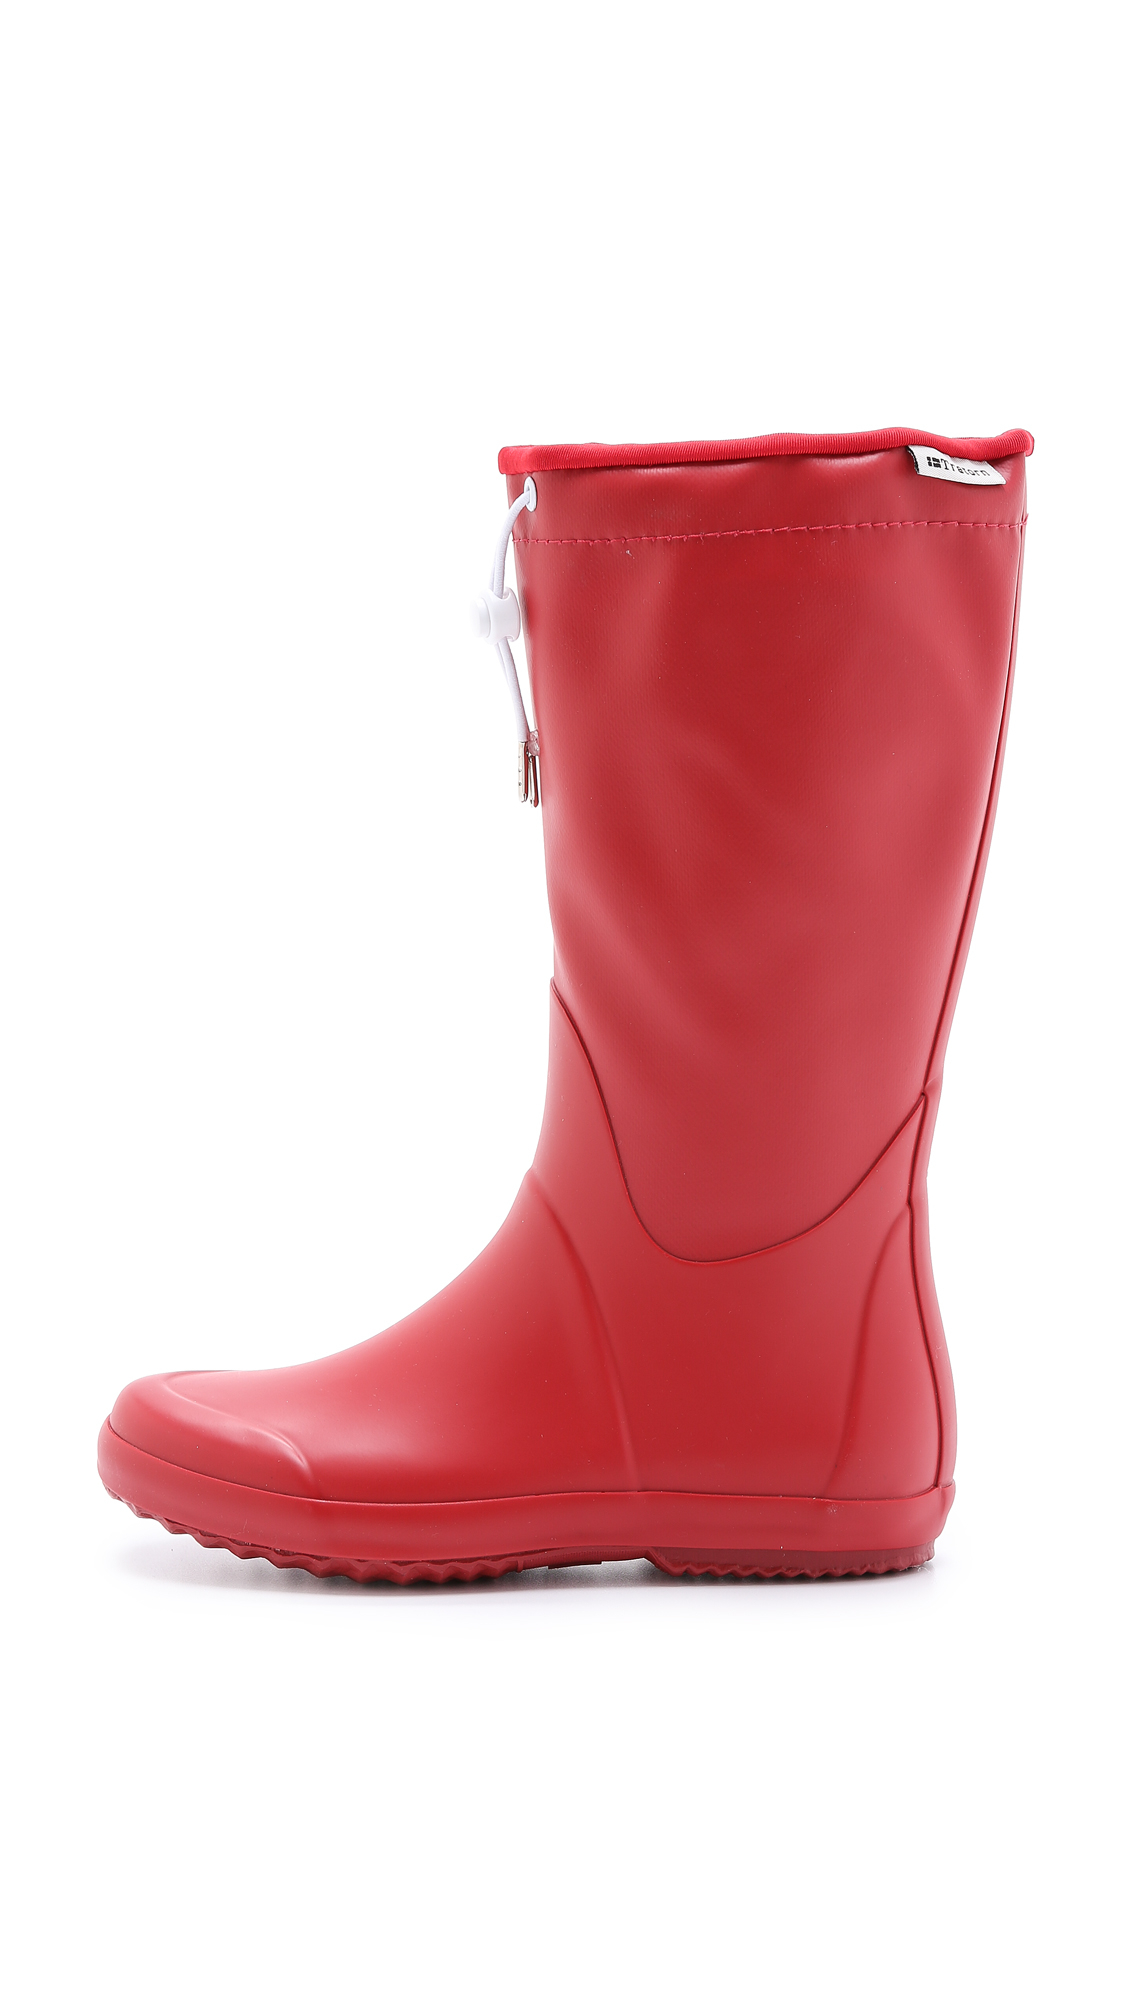 Tretorn Viken Toggle Rubber Boots - Red | Lyst